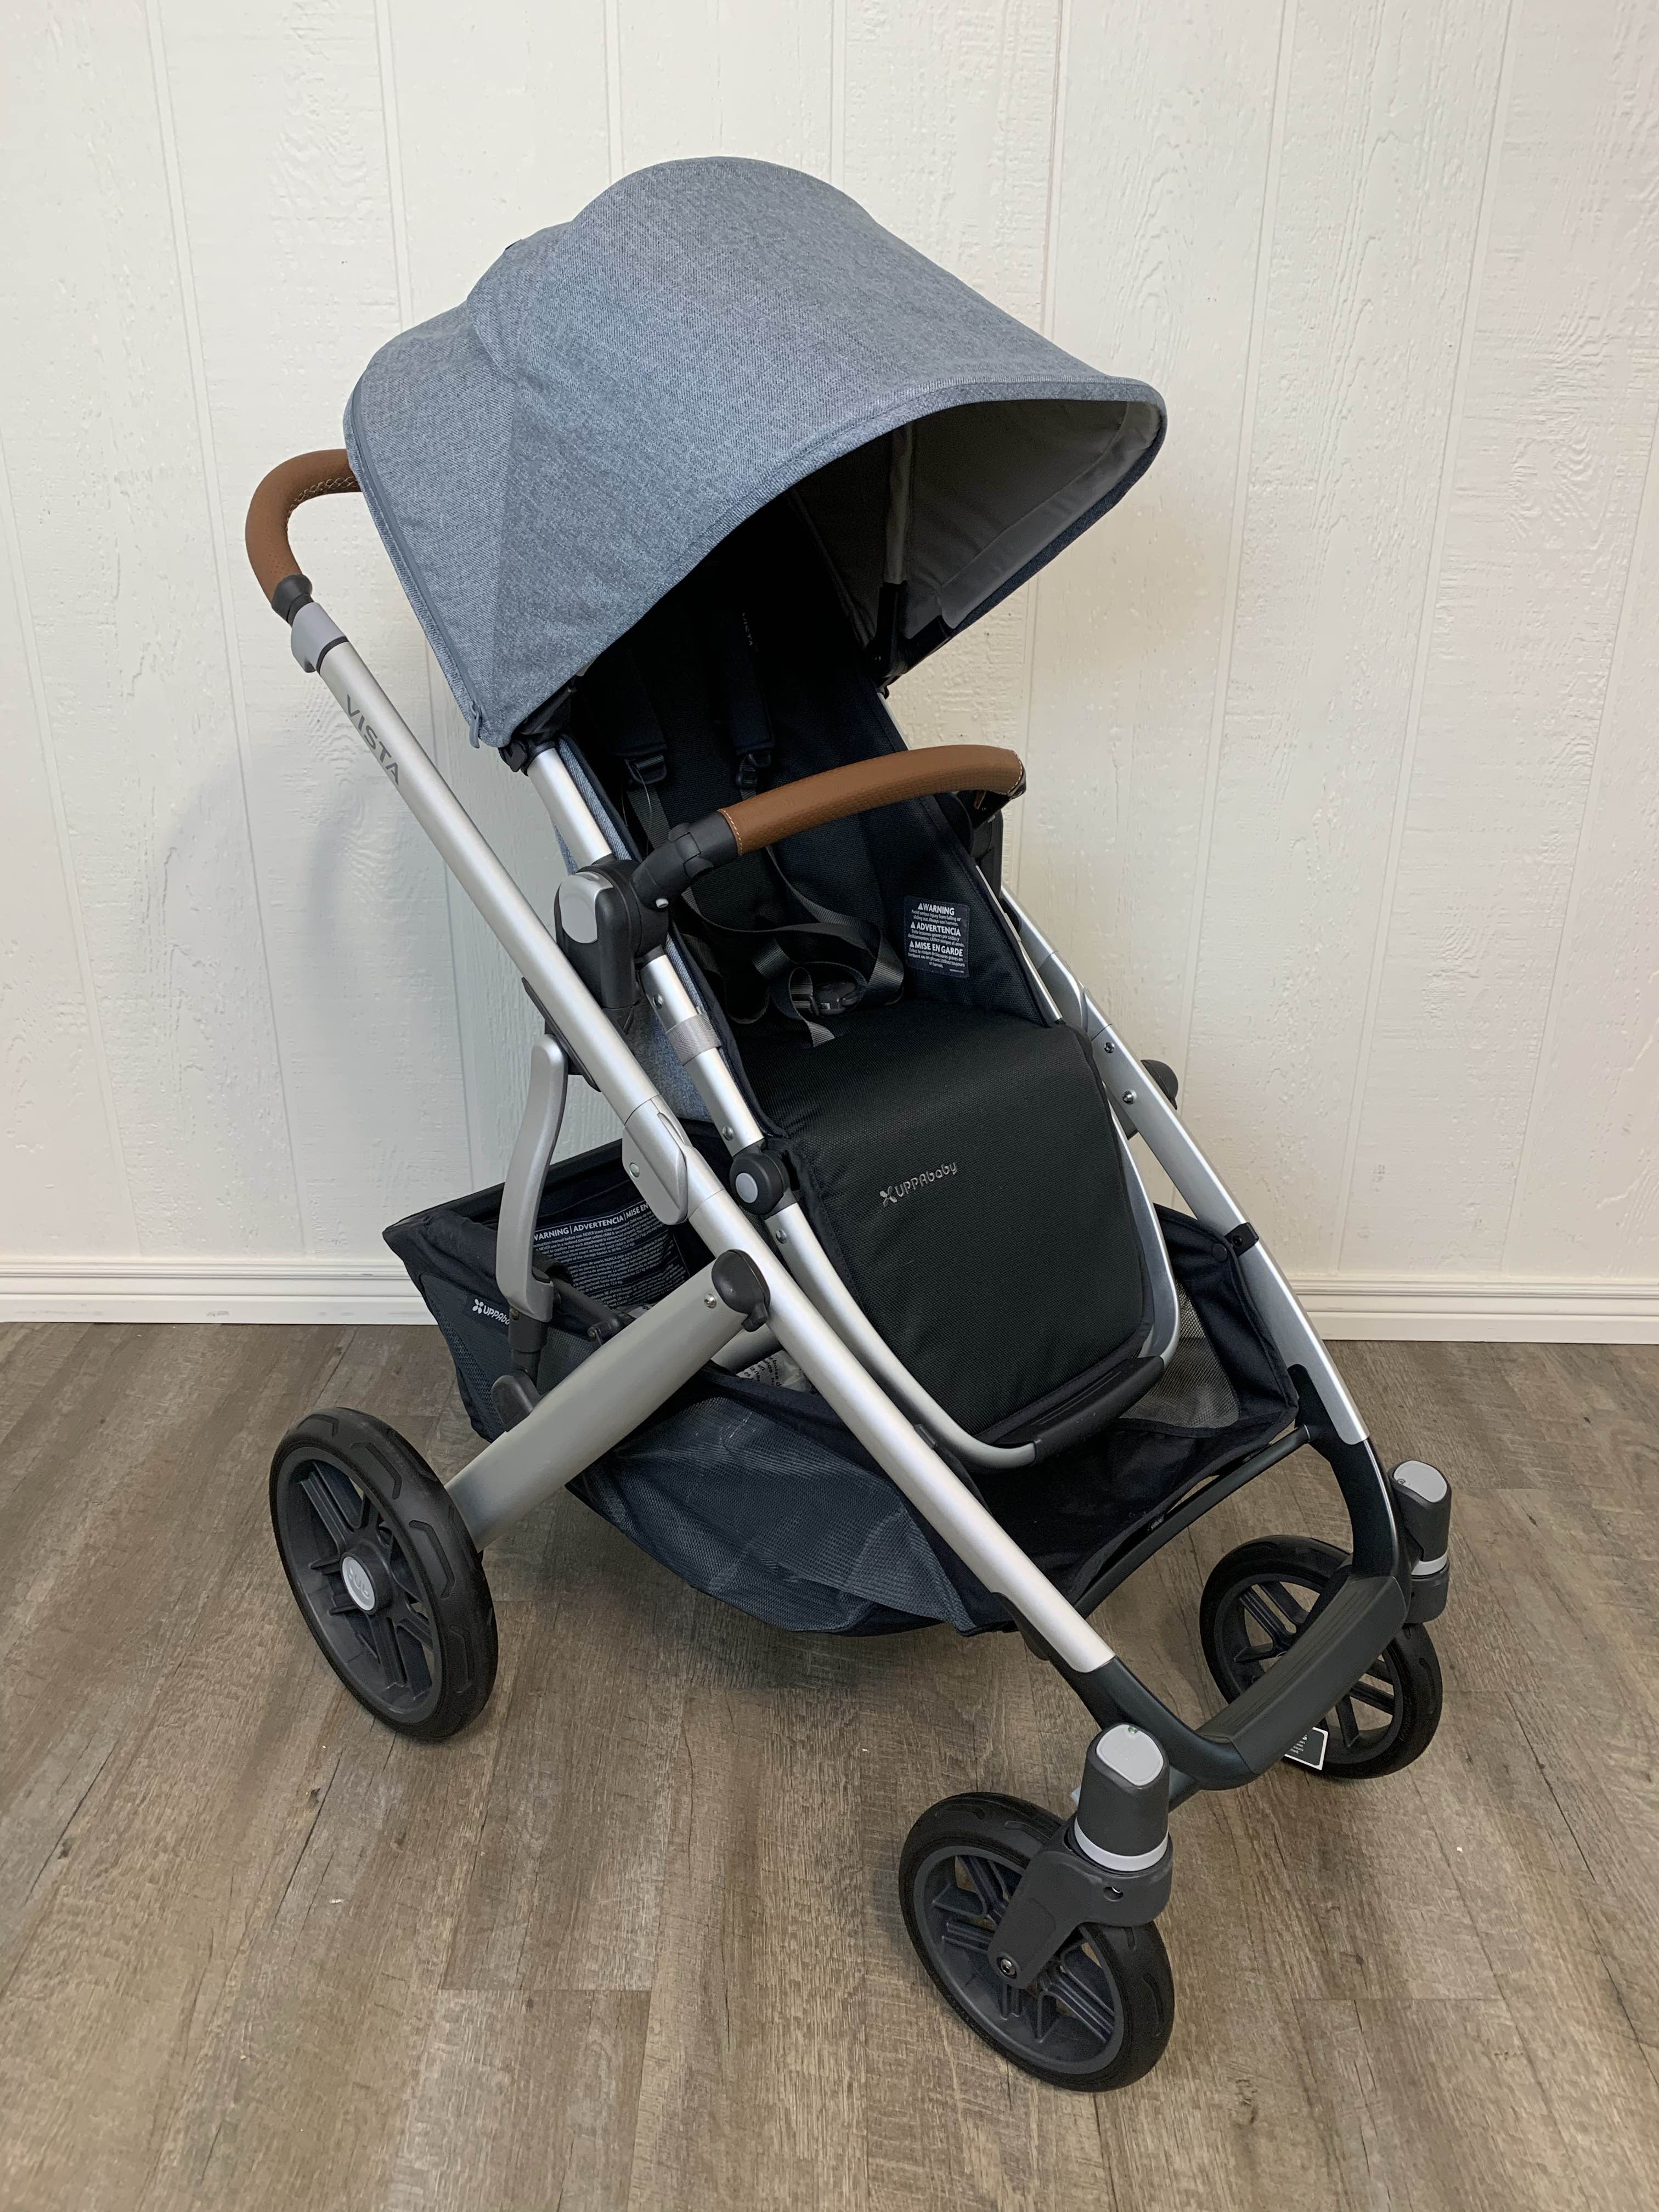 uppababy used stroller for sale